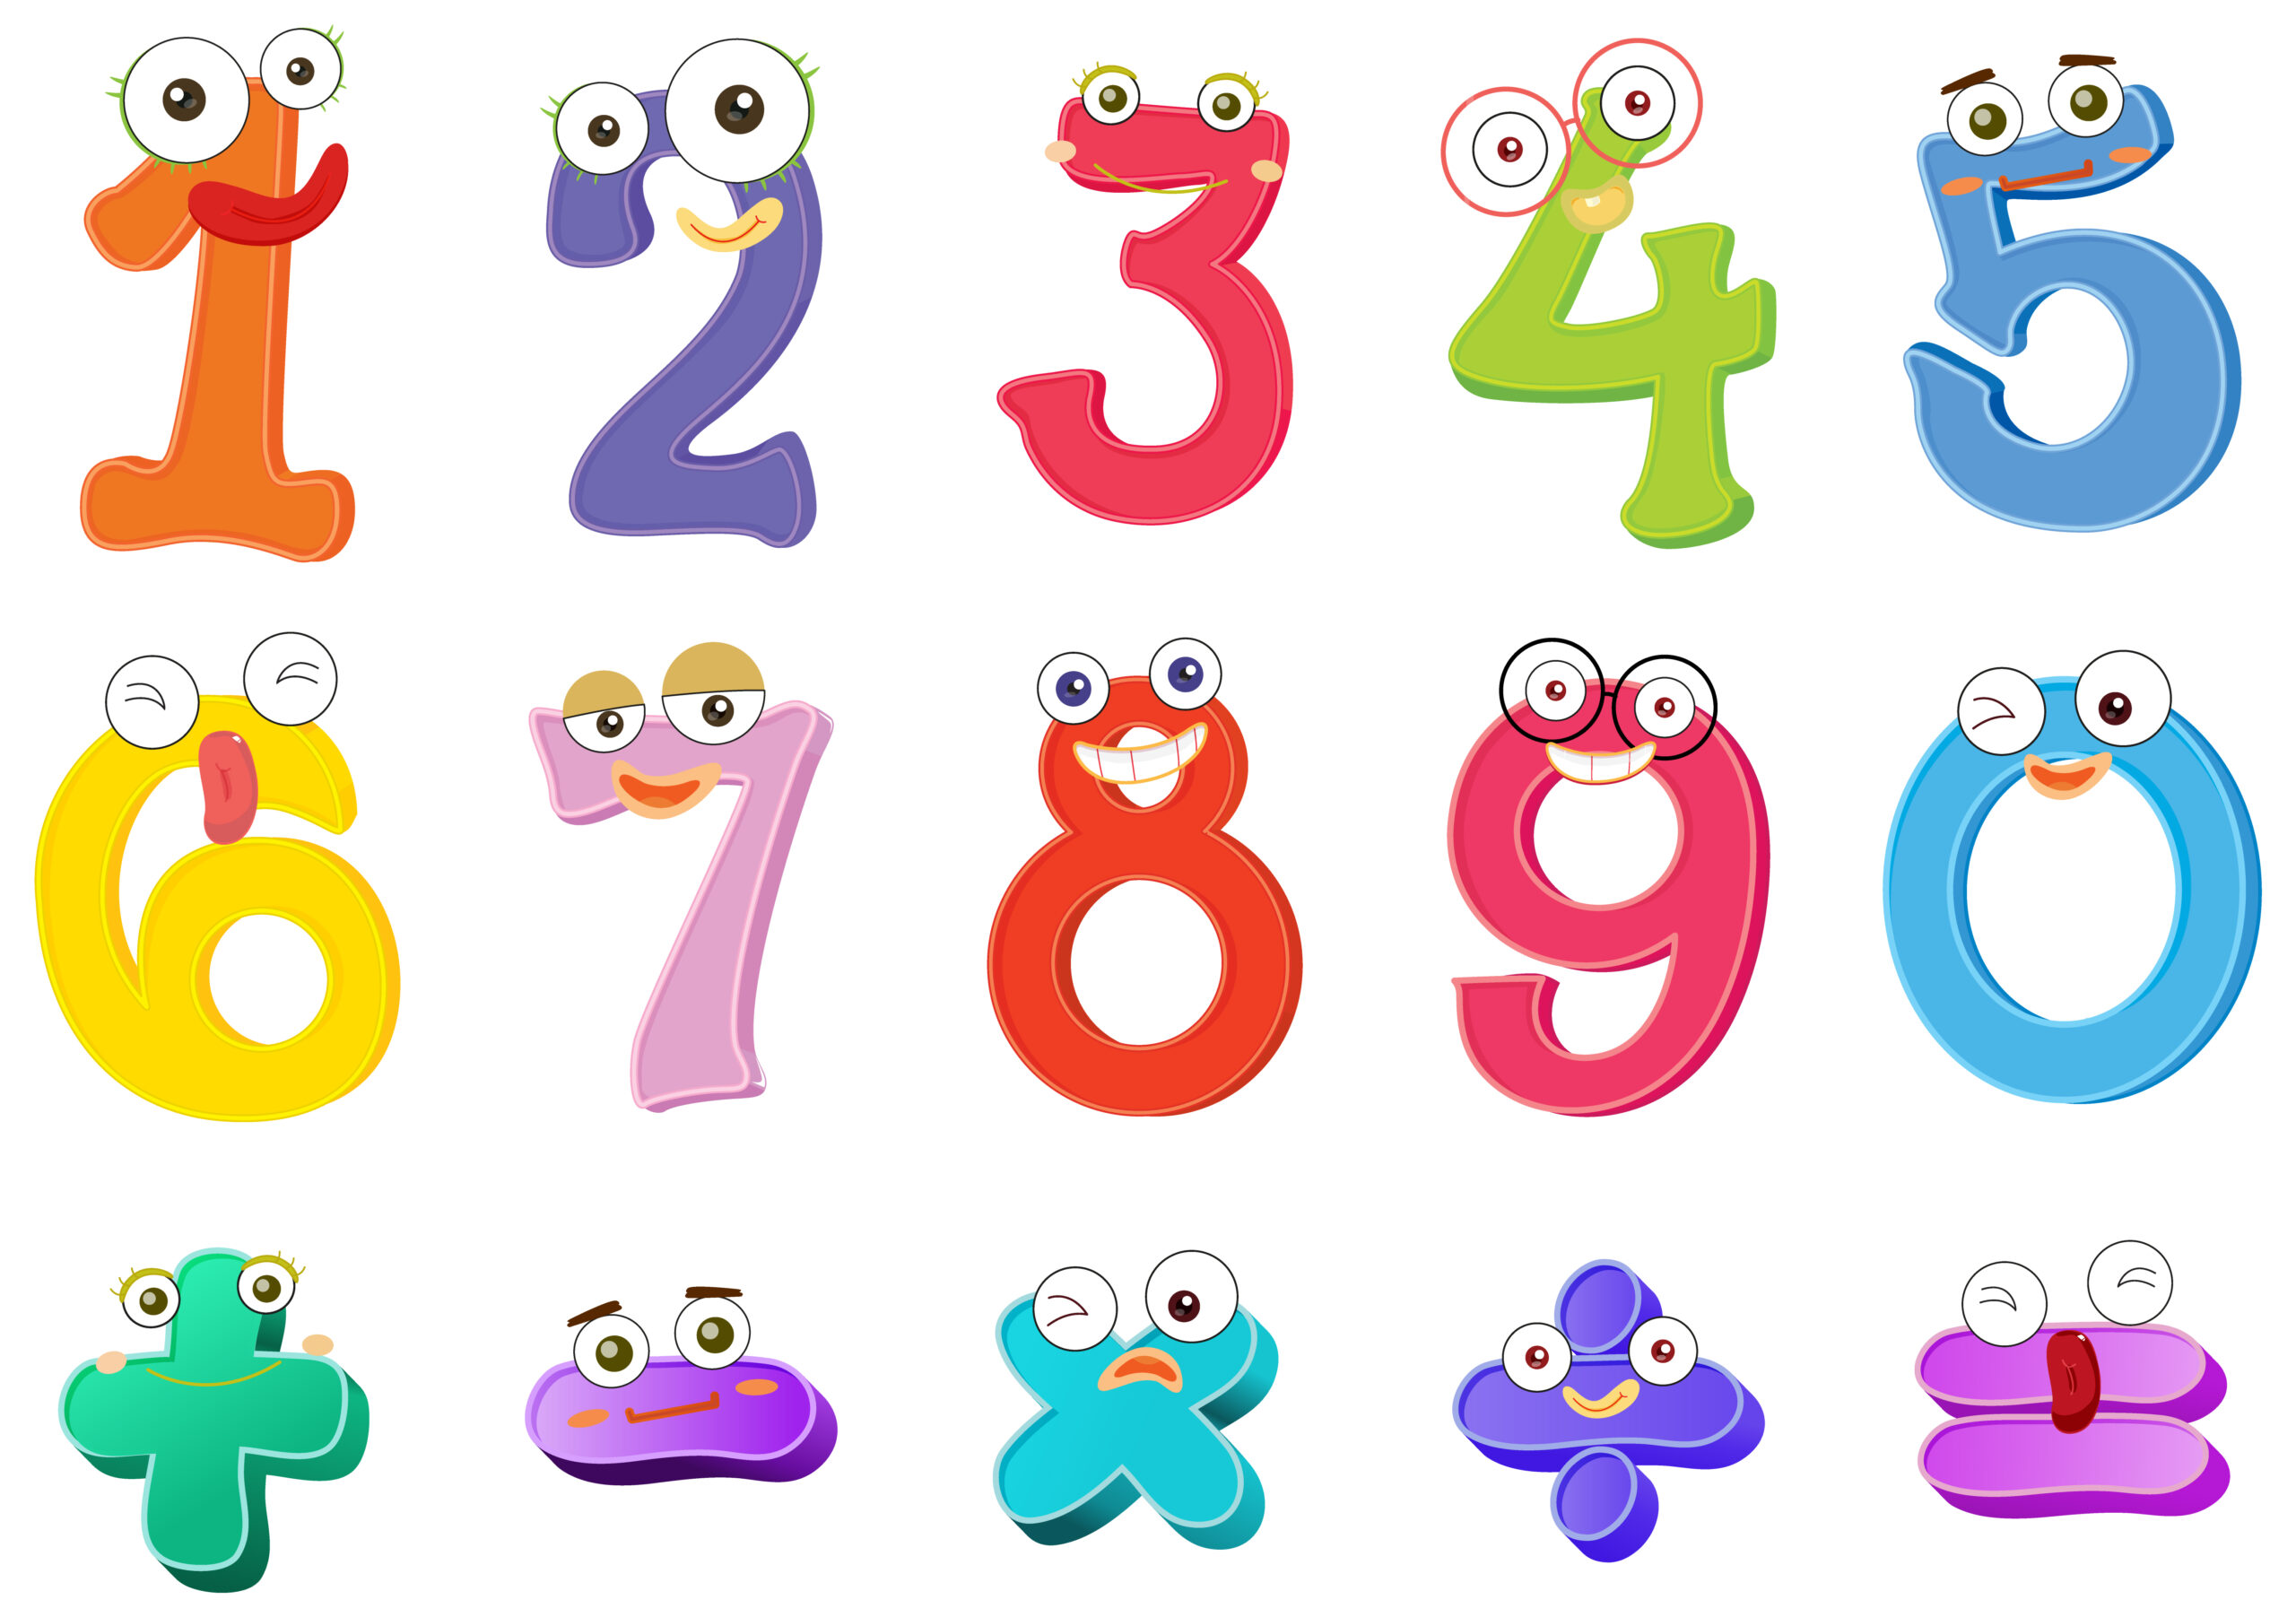 Number of Characters